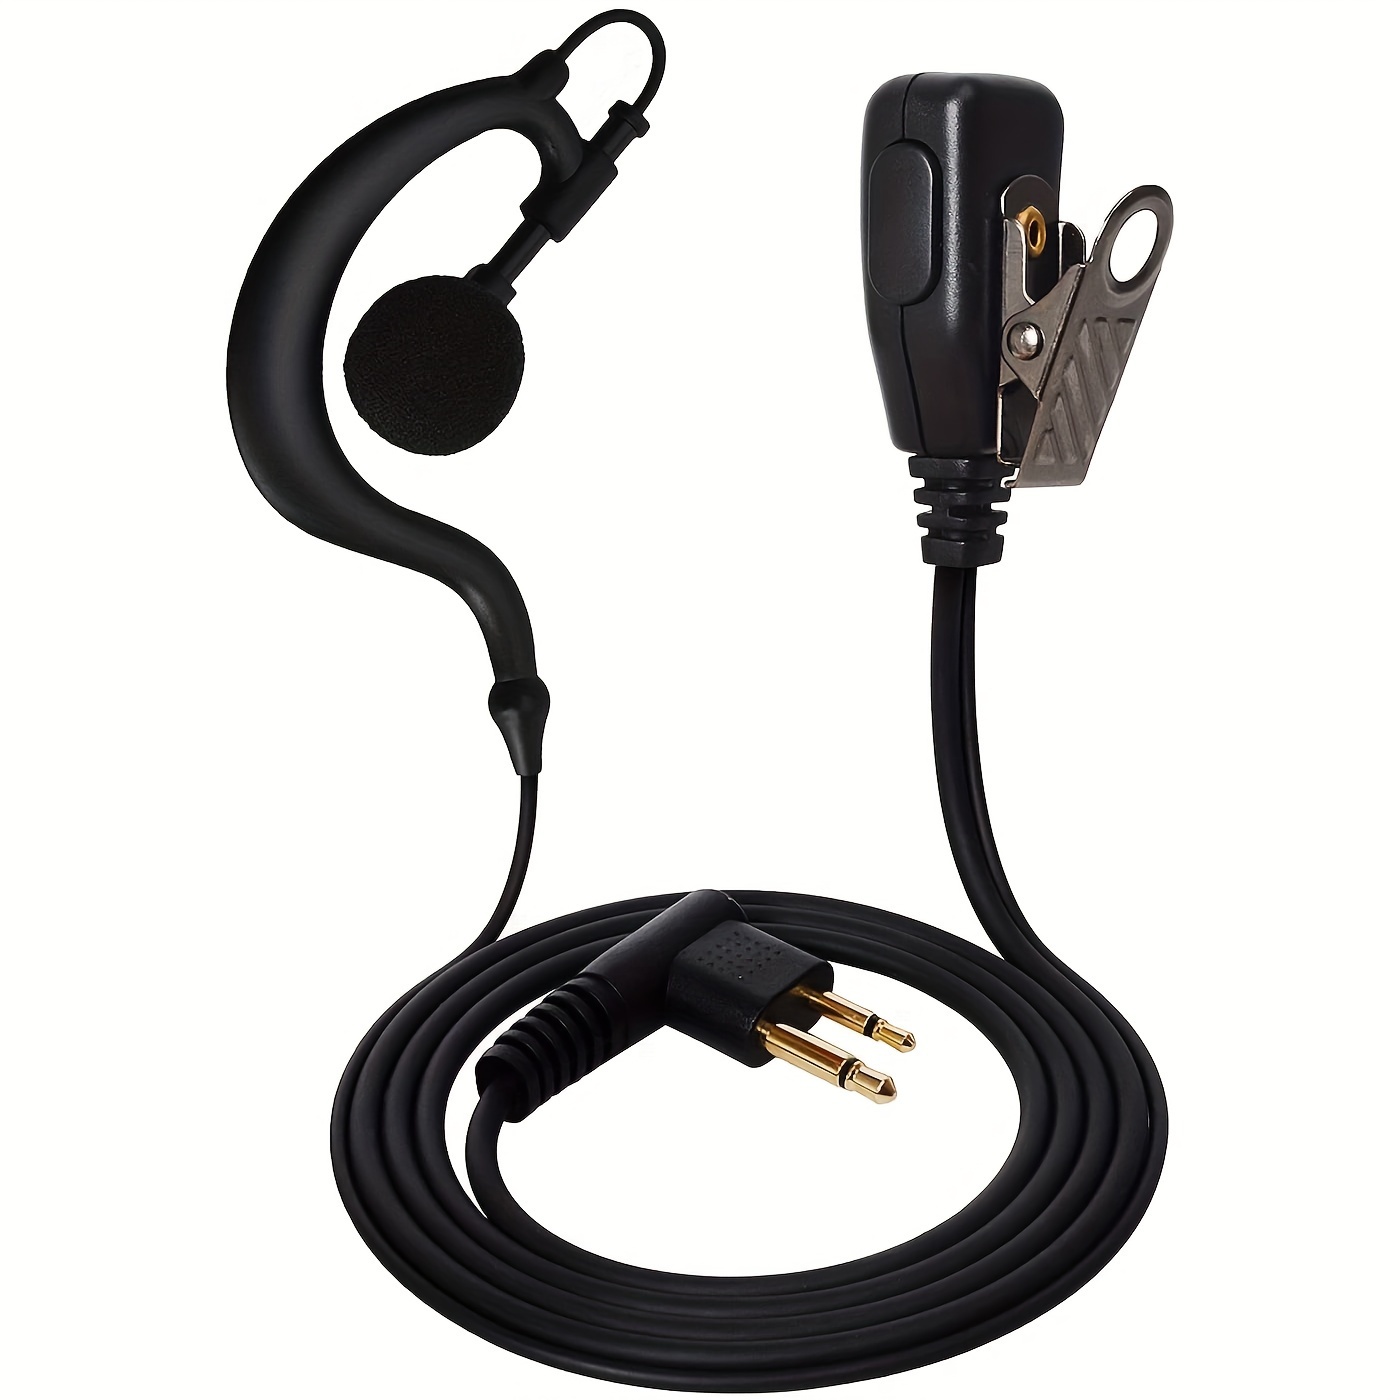 

G-shaped Walkie Talkie Earpiece With Ptt Mic - Compatible With For , & More 2-way Radios, Durable Tpu, Non-waterproof, Ideal For Outdoor Leisure